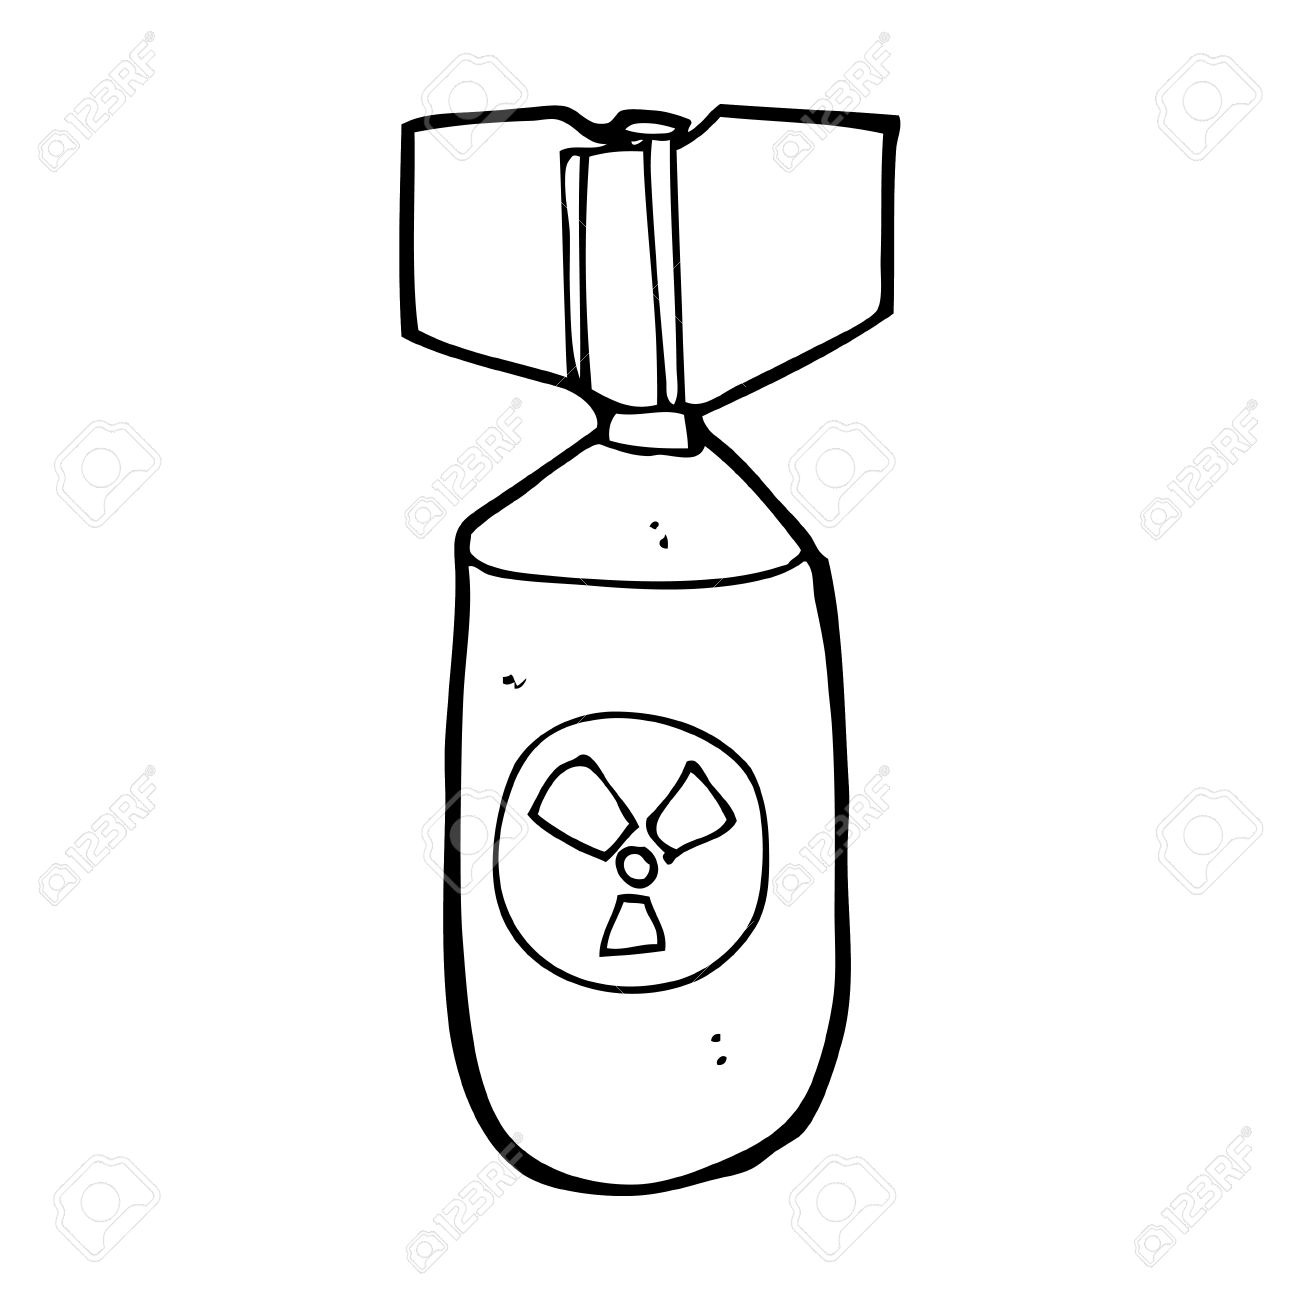 Bomb clipart drawing. Nuclear at getdrawings com